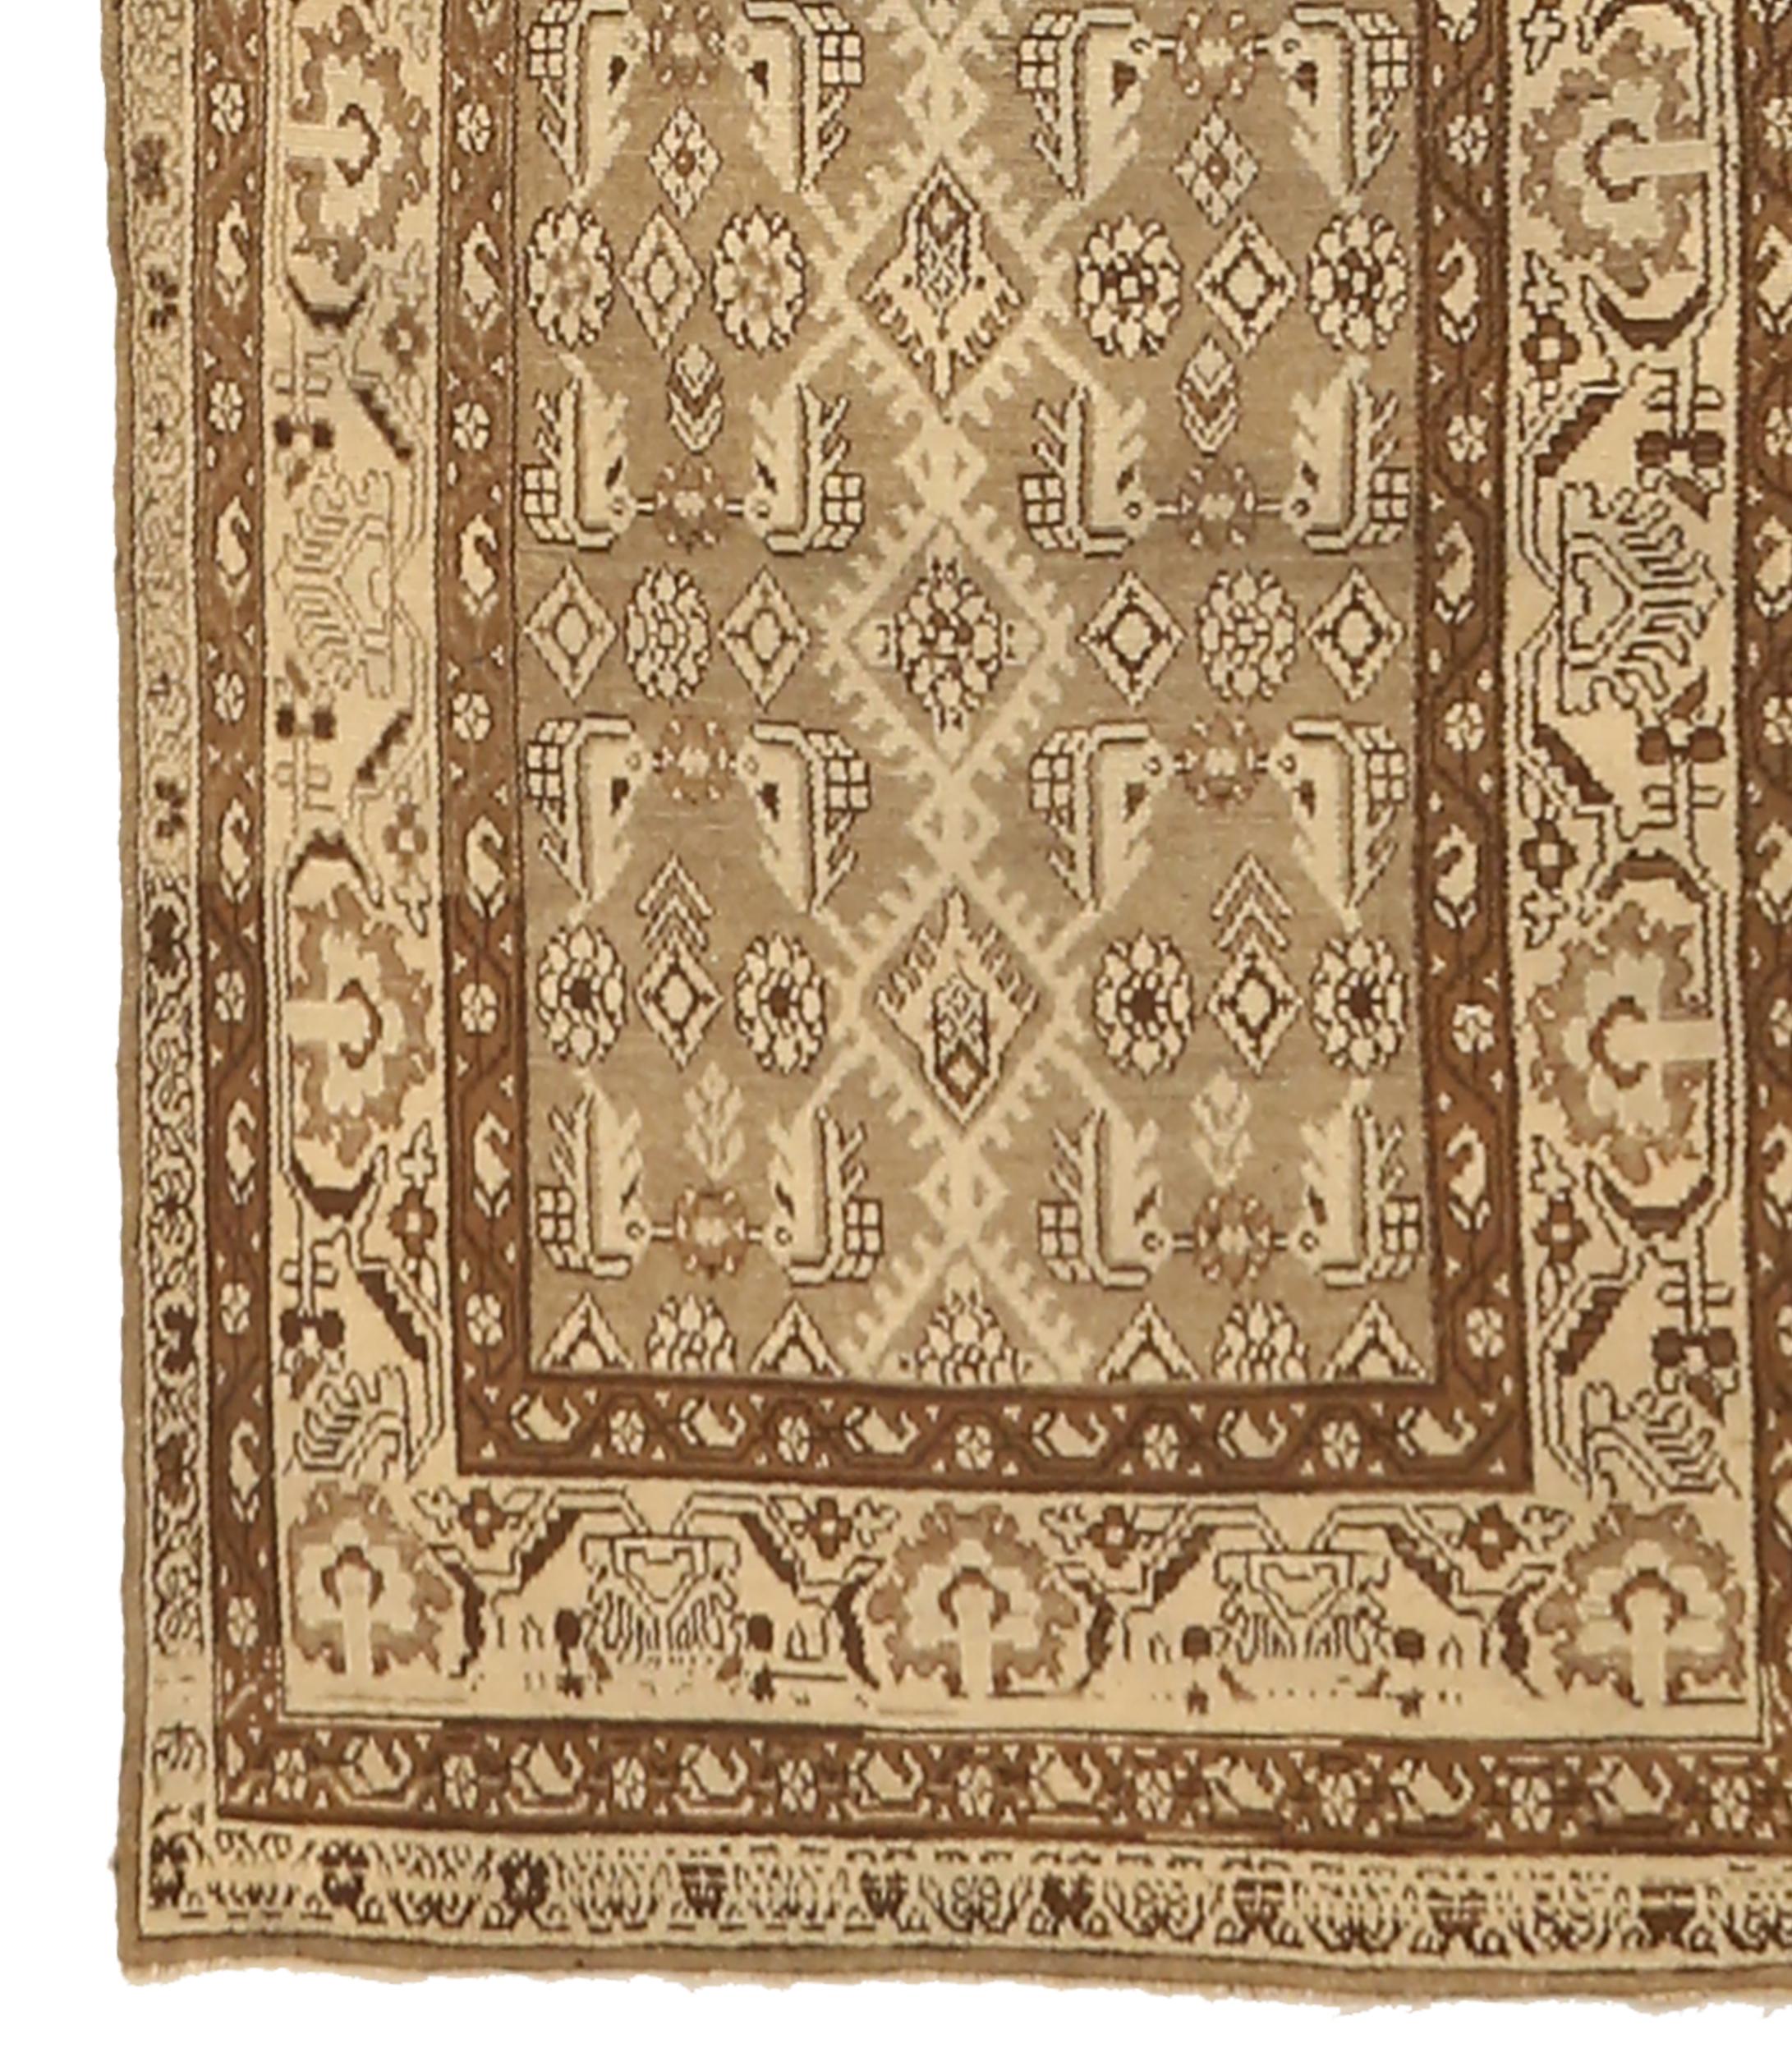 Hand-Woven Antique Handwoven Persian Runner Rug Malayer Design For Sale